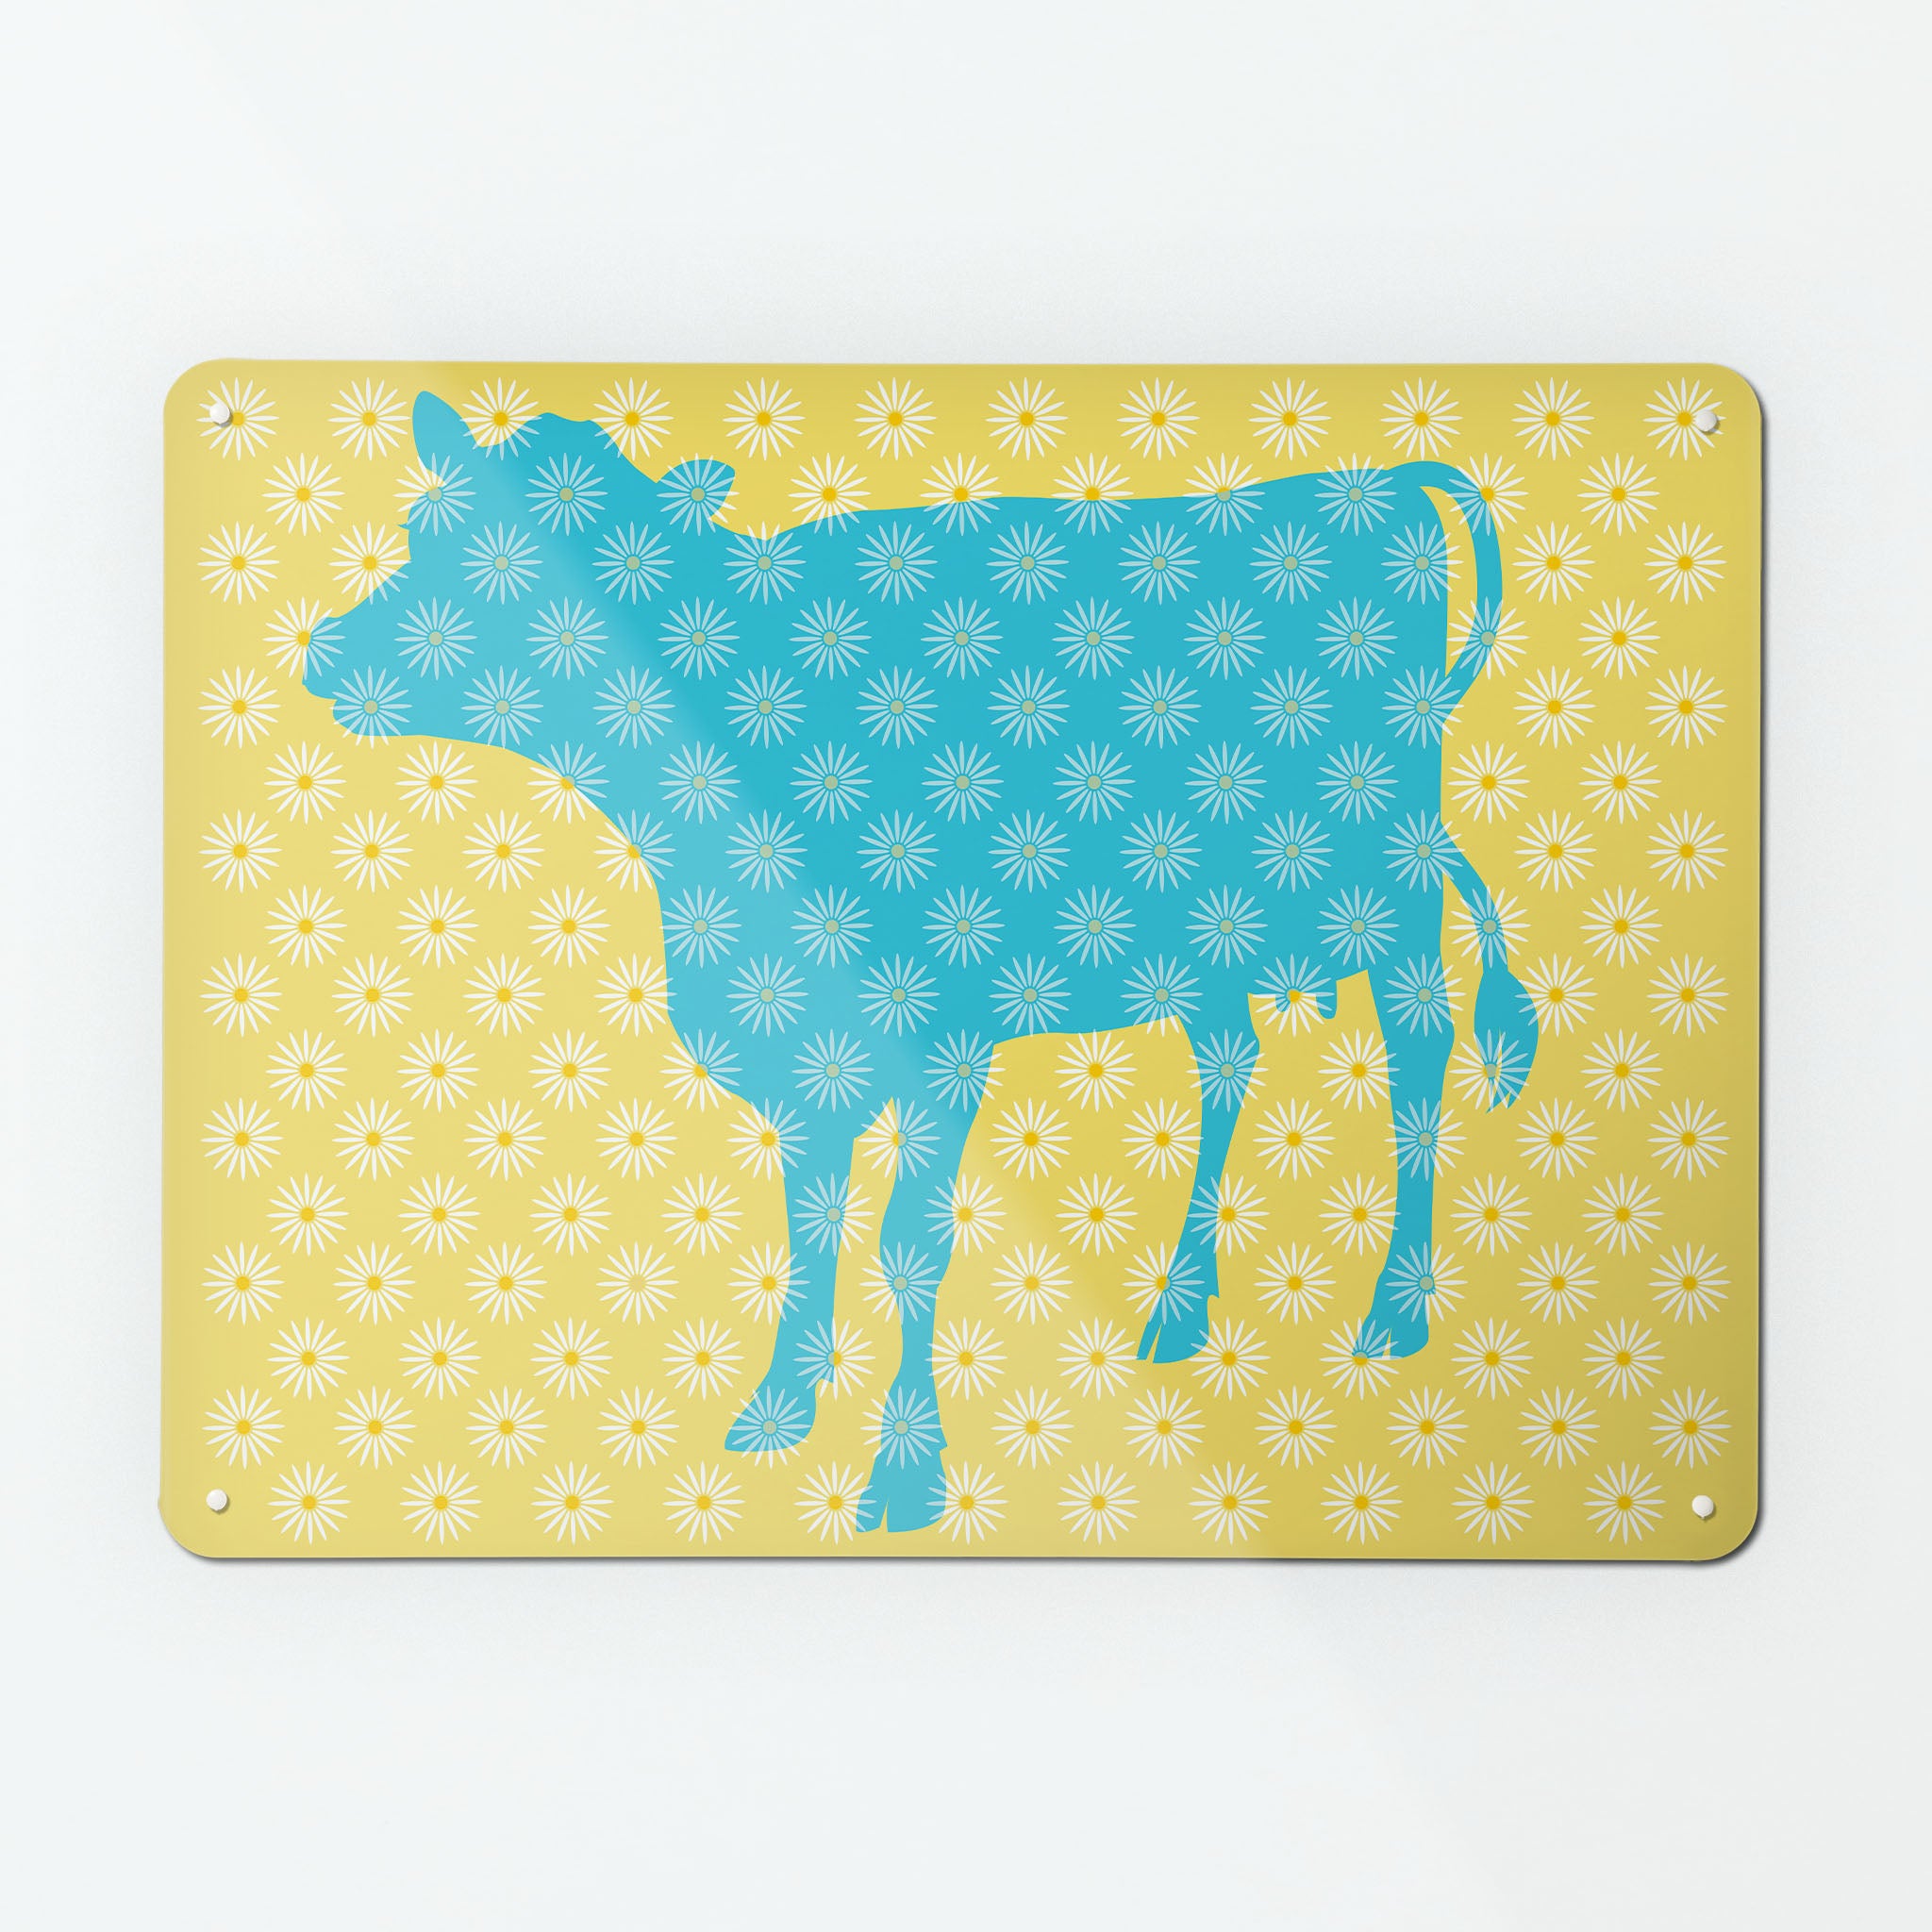 A large magnetic notice board by Beyond the Fridge with a daisy the cow design in blue, white and yellow